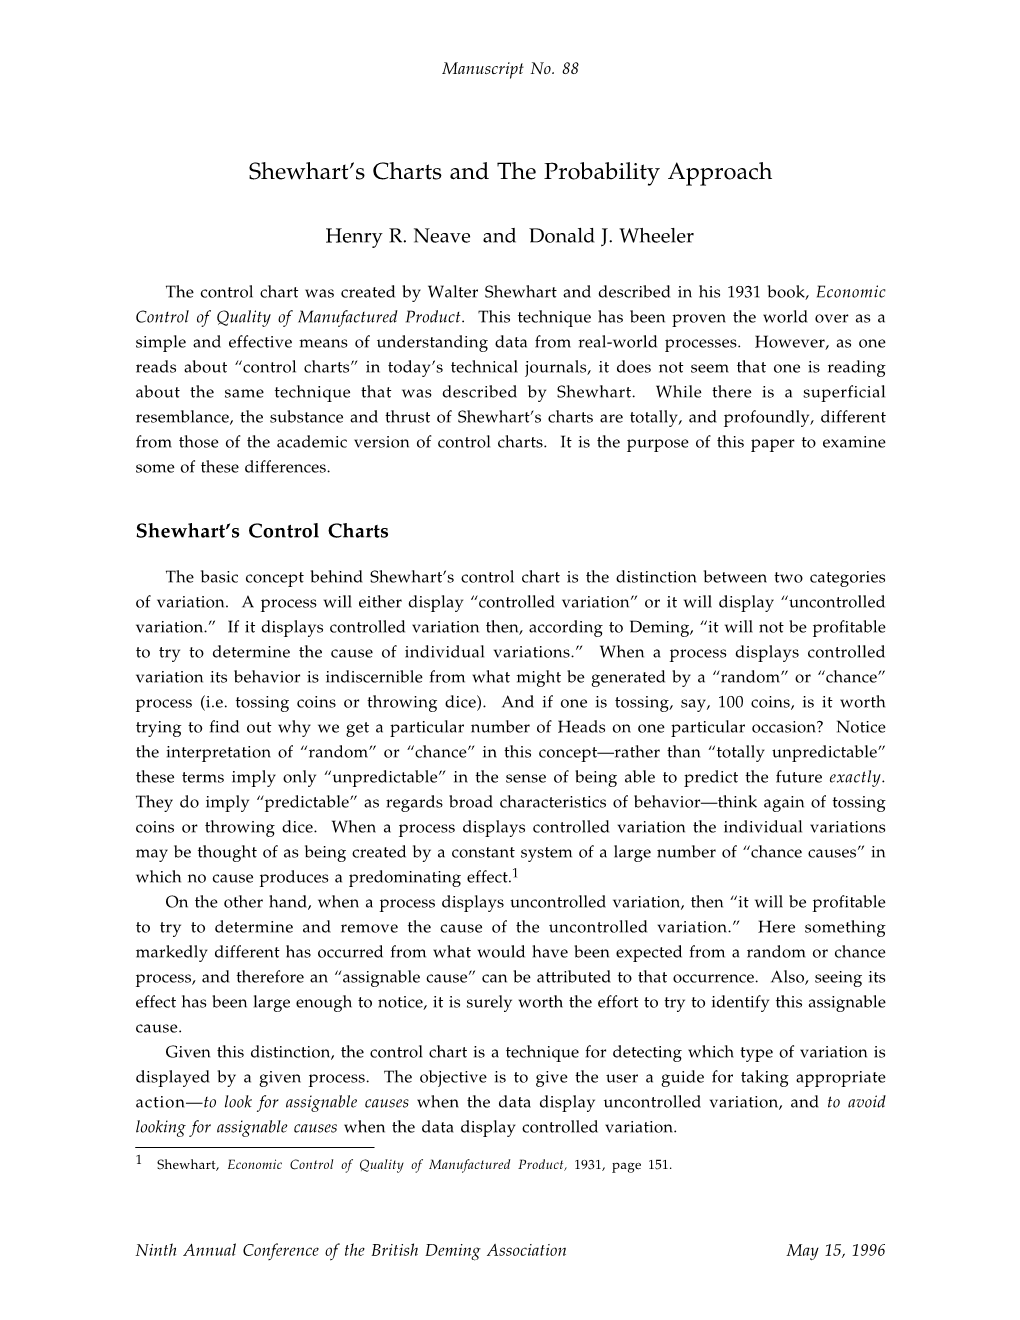 88. Shewhart's Charts and the Probability Approach